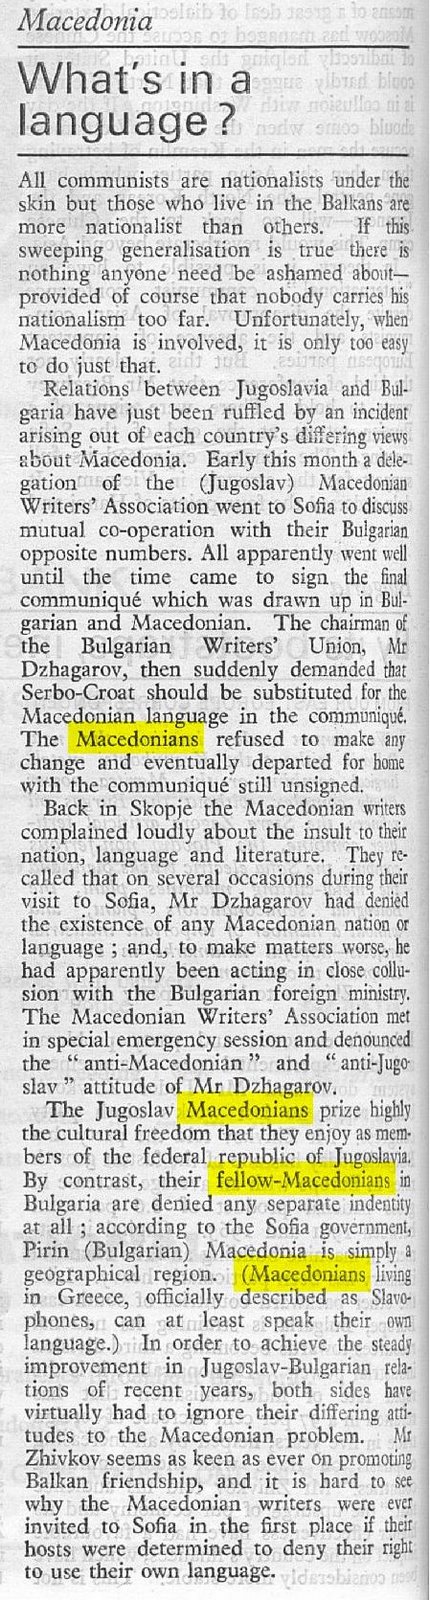 1954+_What is in a language